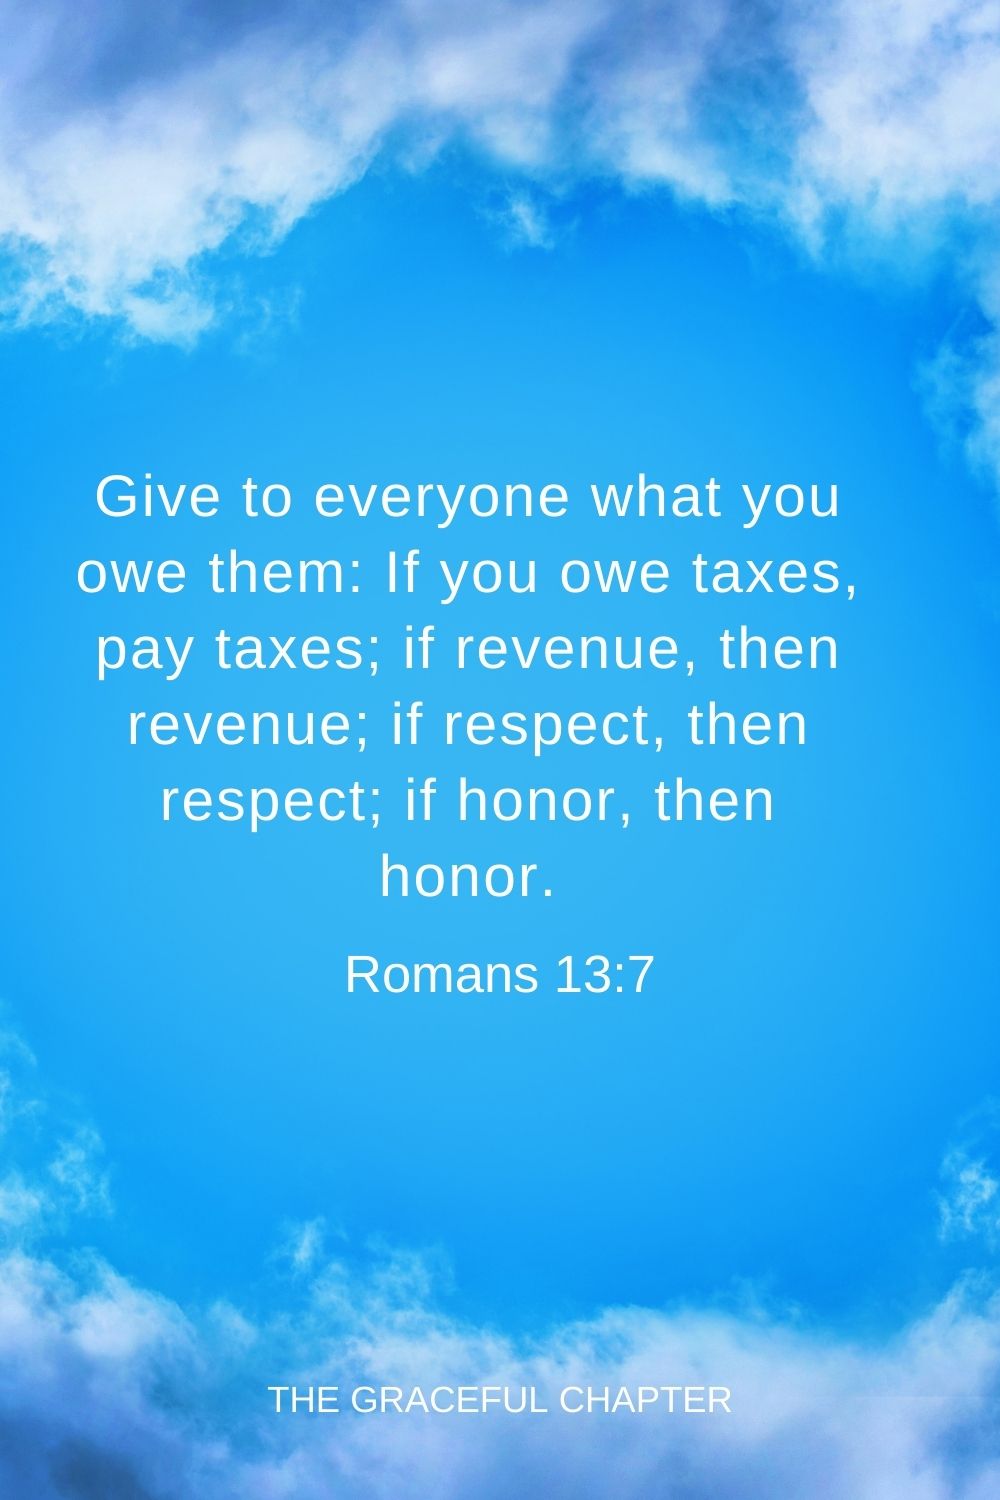 Give to everyone what you owe them: If you owe taxes, pay taxes; if revenue, then revenue; if respect, then respect; if honor, then honor. Romans 13:7